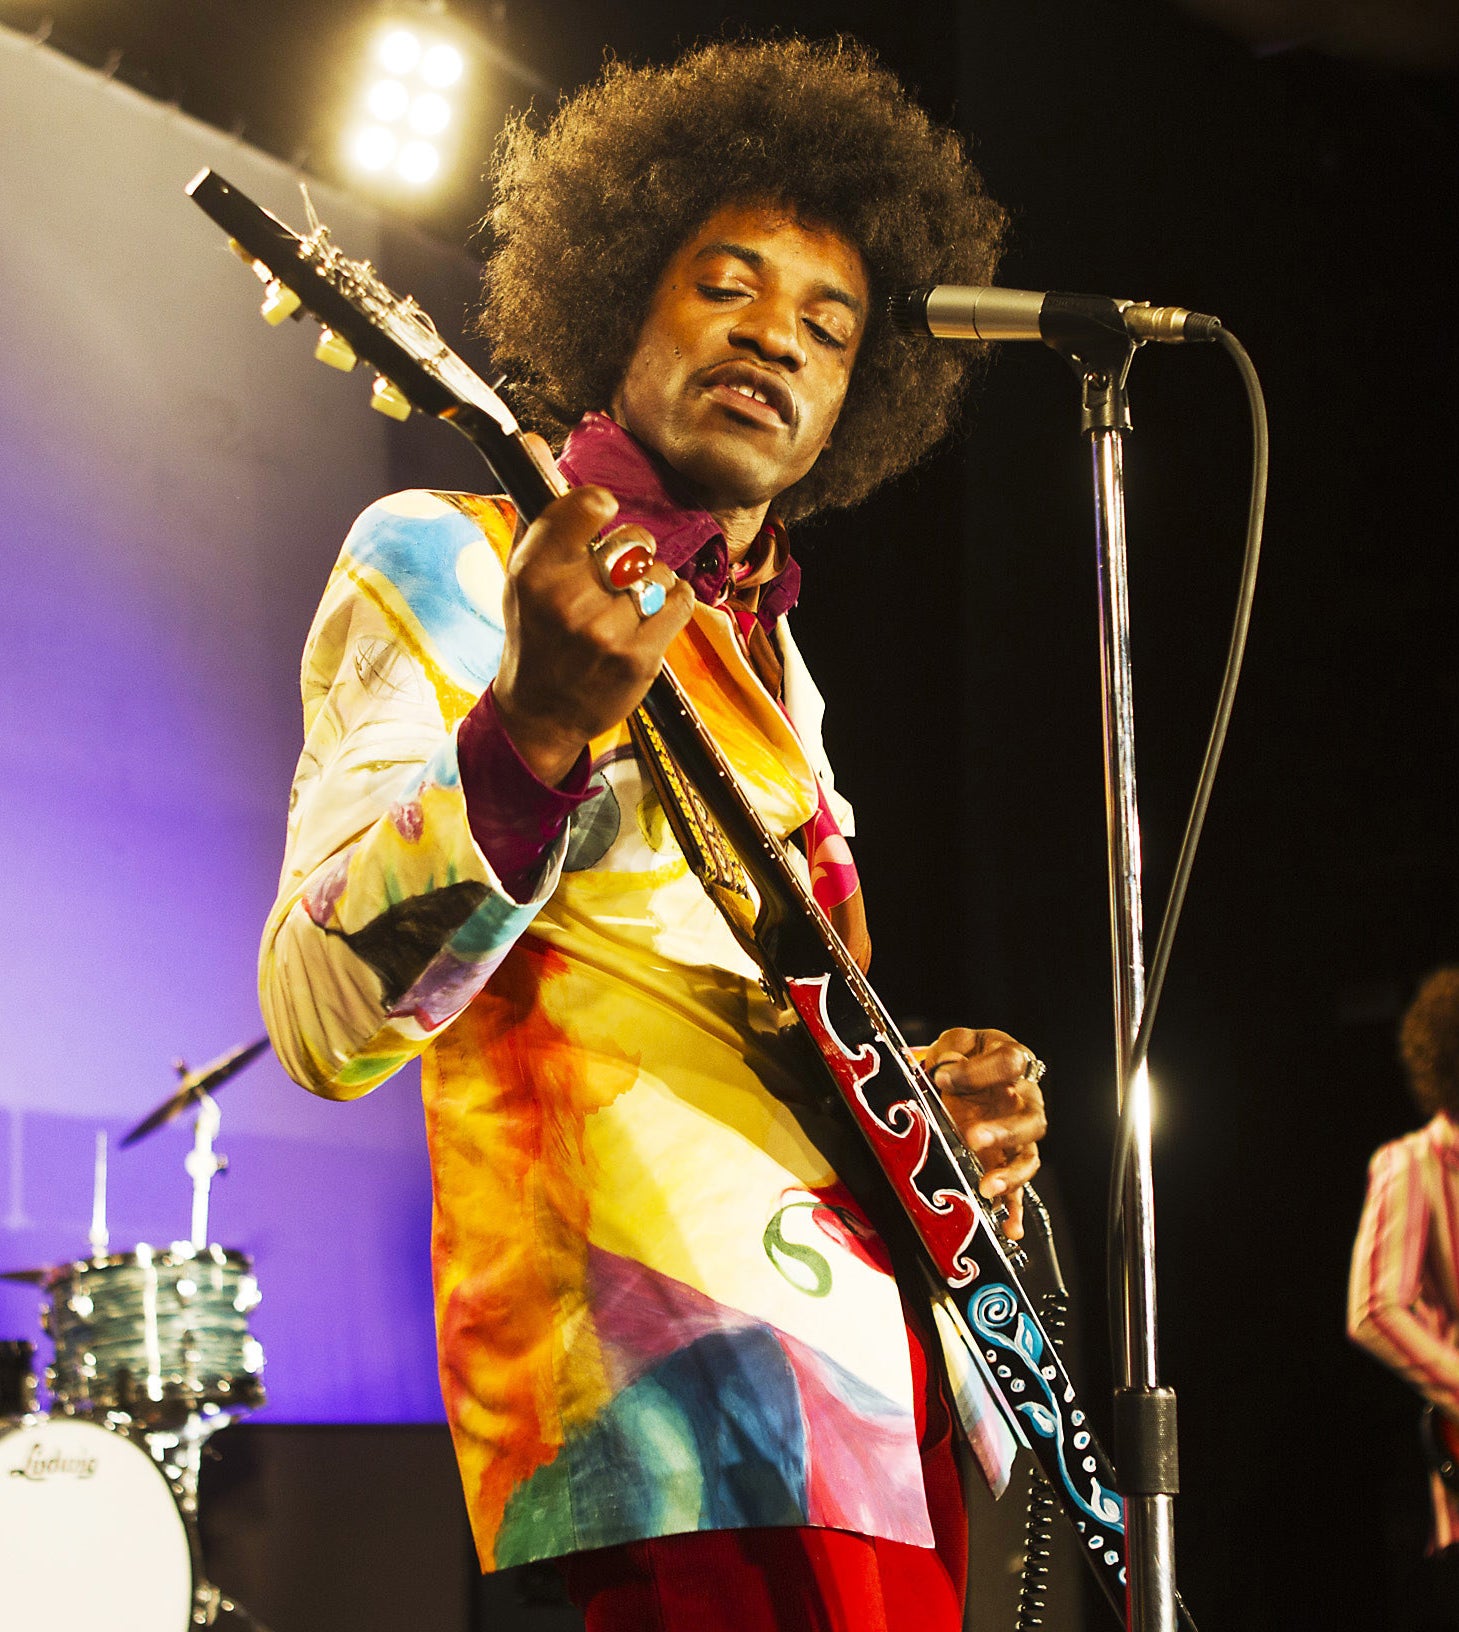 André 3000 dressed as Jimi Hendrix, playing guitar